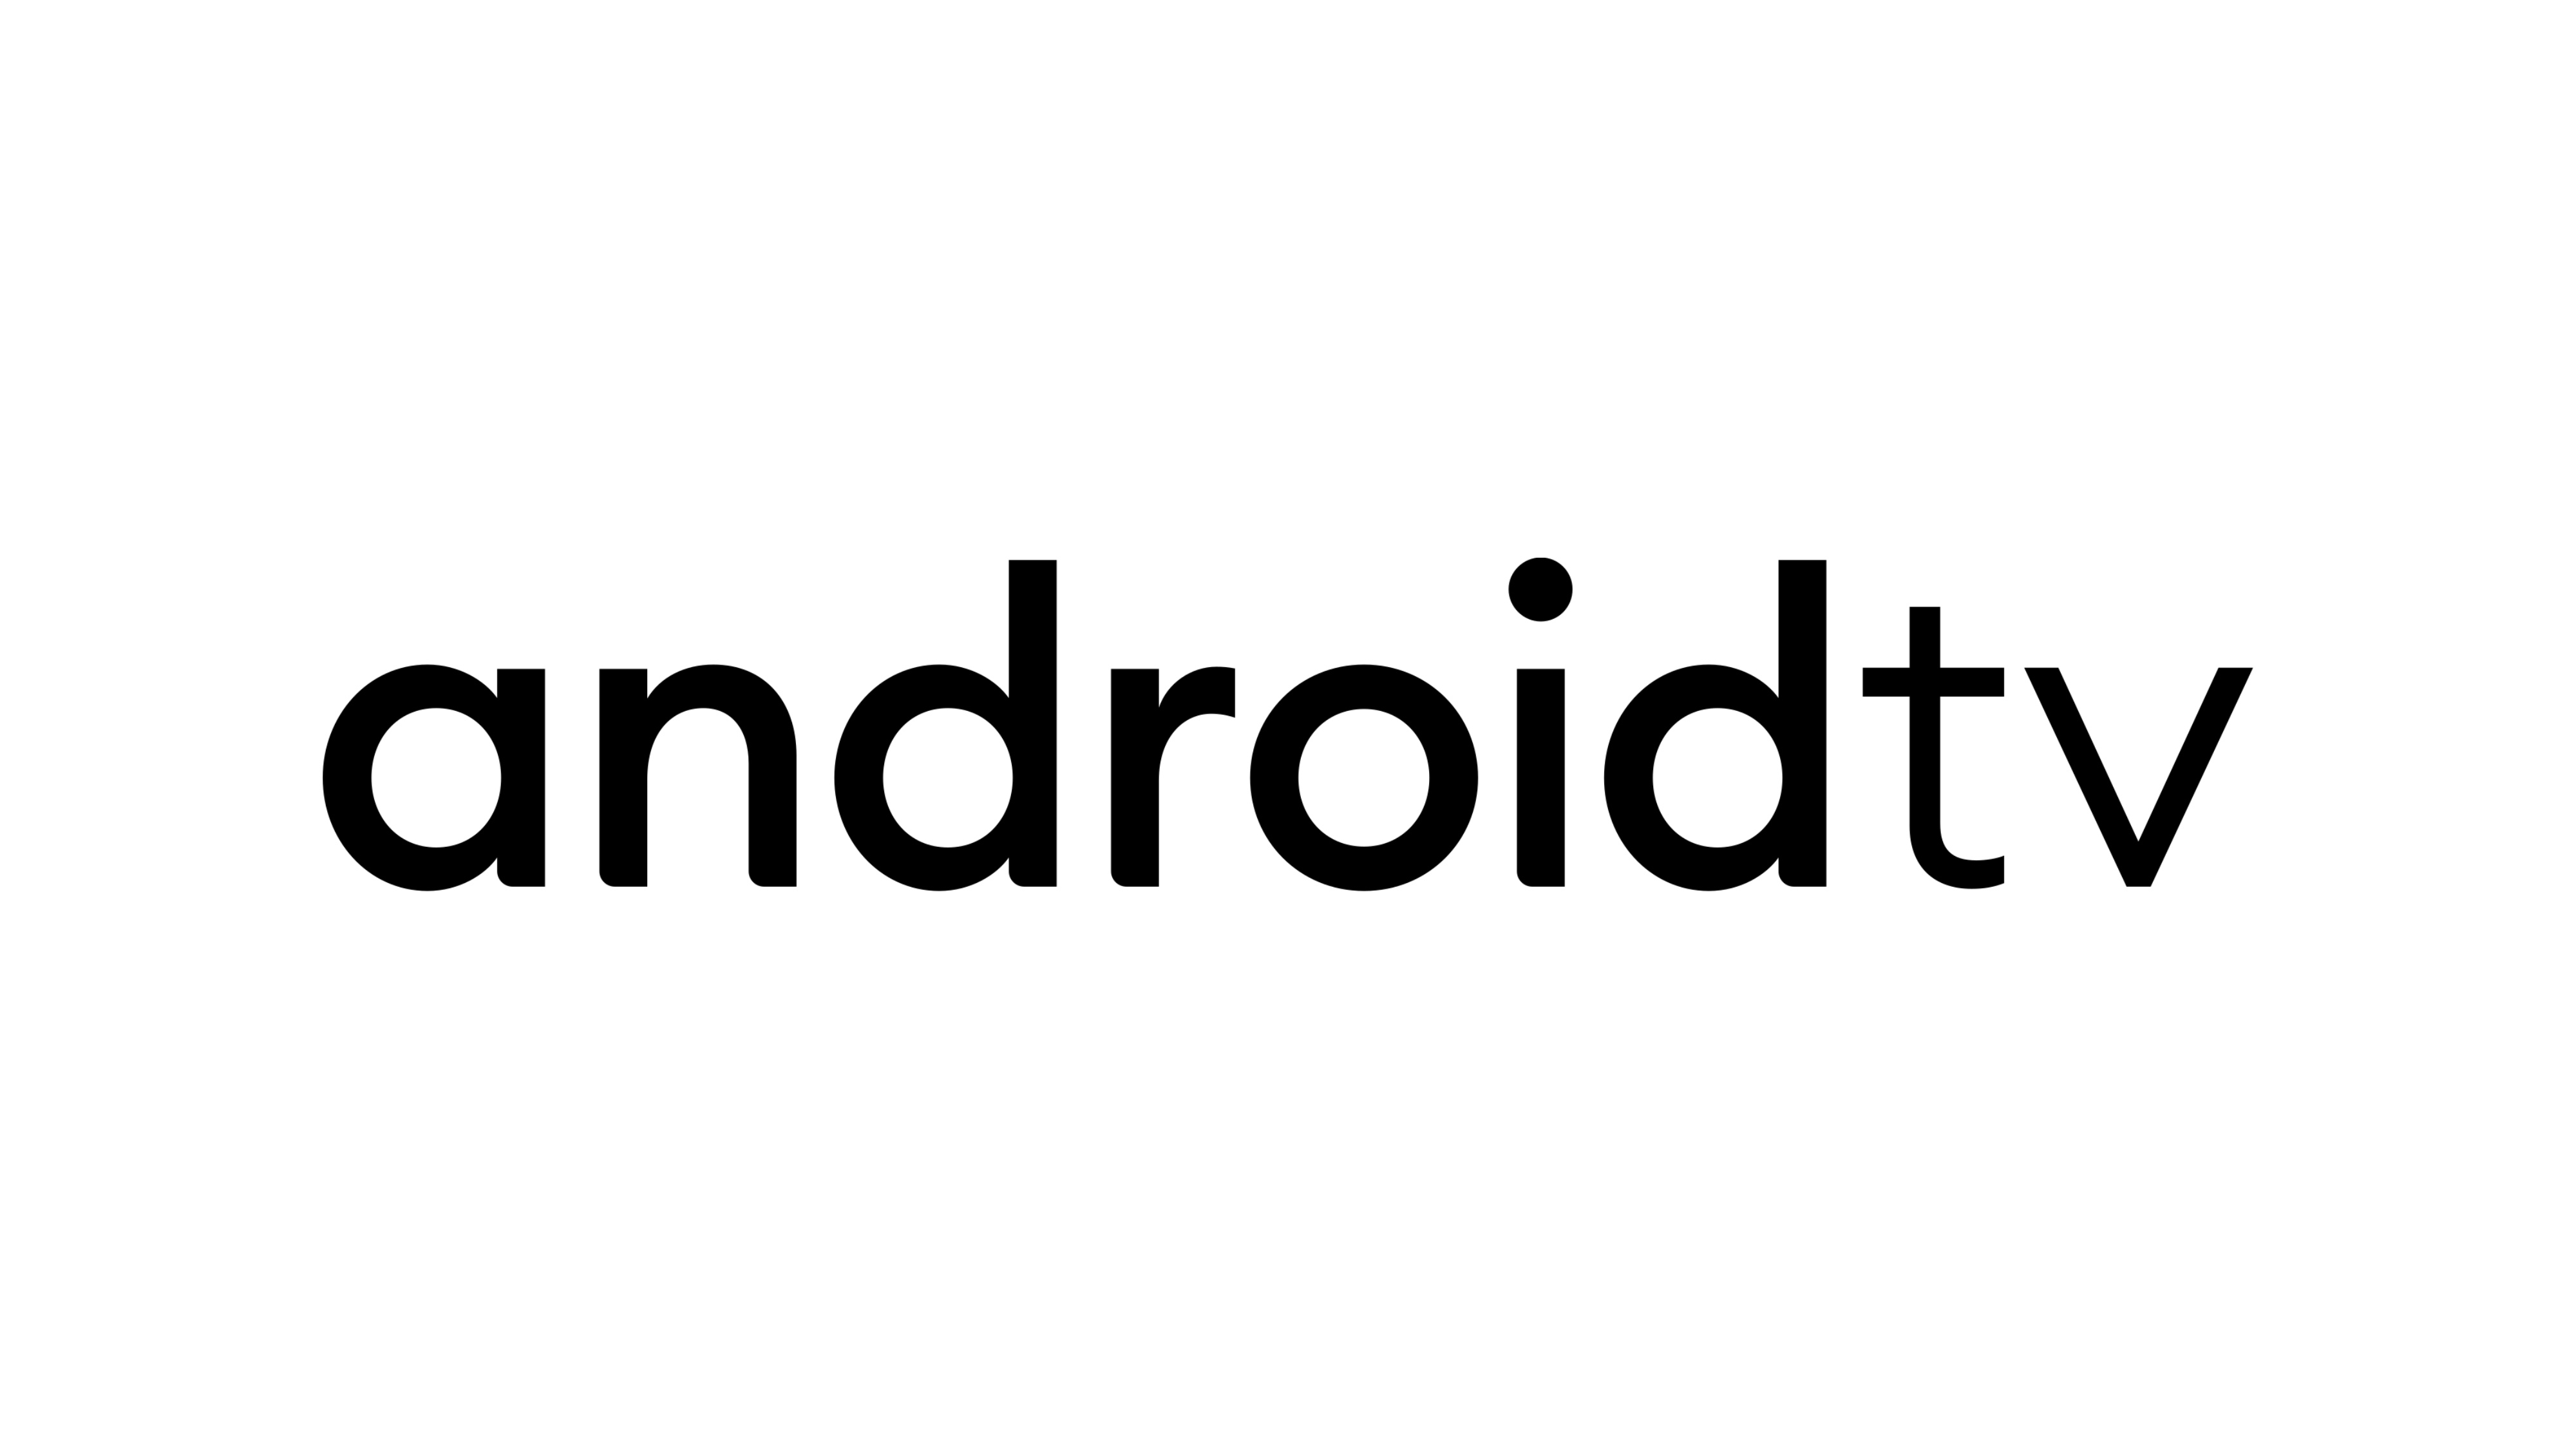 Google Brings Ability to Install Apps on Android TV Through Smartphones,  Users Report